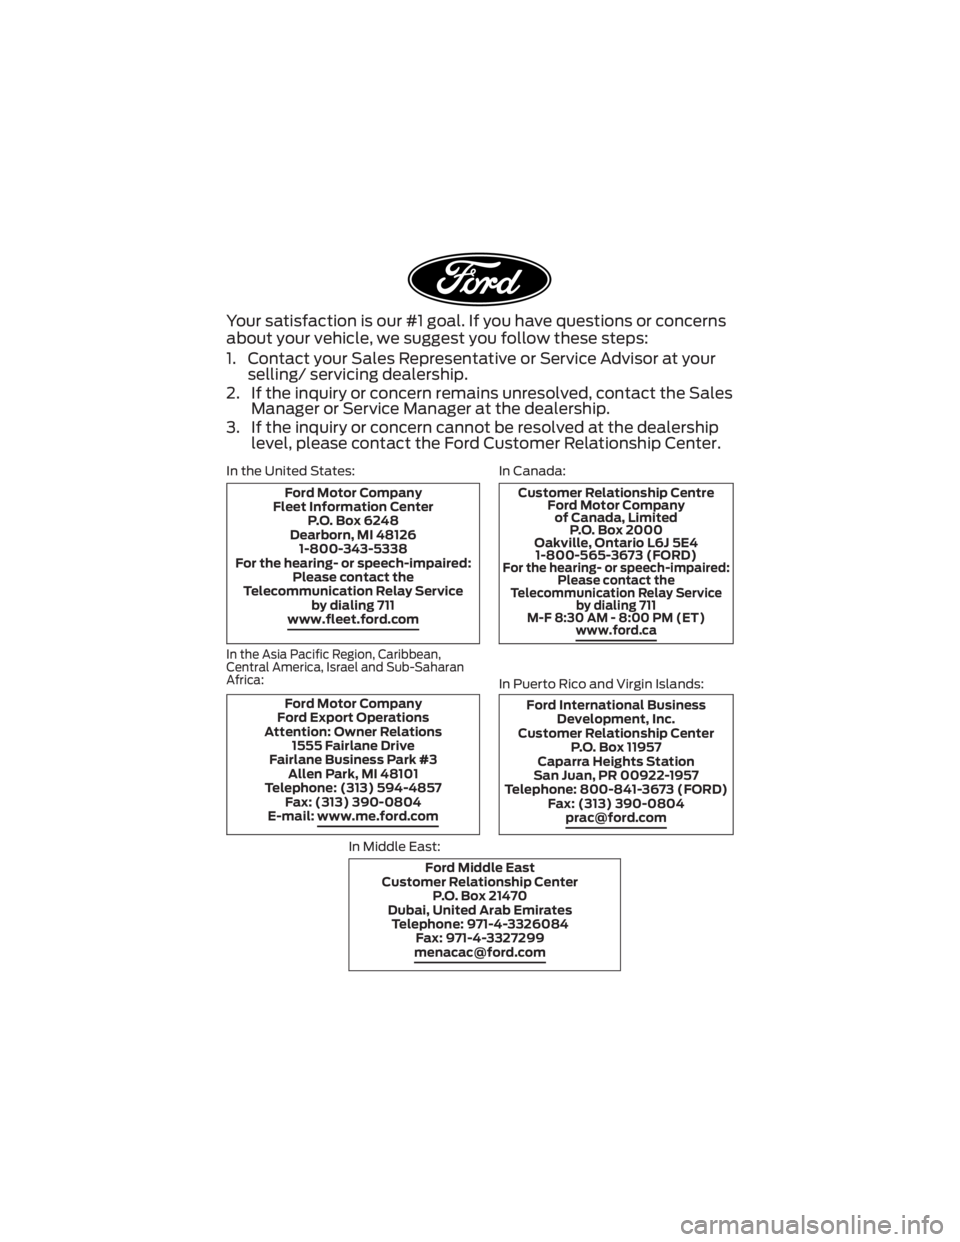 FORD F-650/750 2022  Warranty Guide Your satisfaction is our #1 goal. If you have questions or concerns
about your vehicle, we suggest you follow these steps:
1. Contact your Sales Representative or Service Advisor at yourselling/ servi